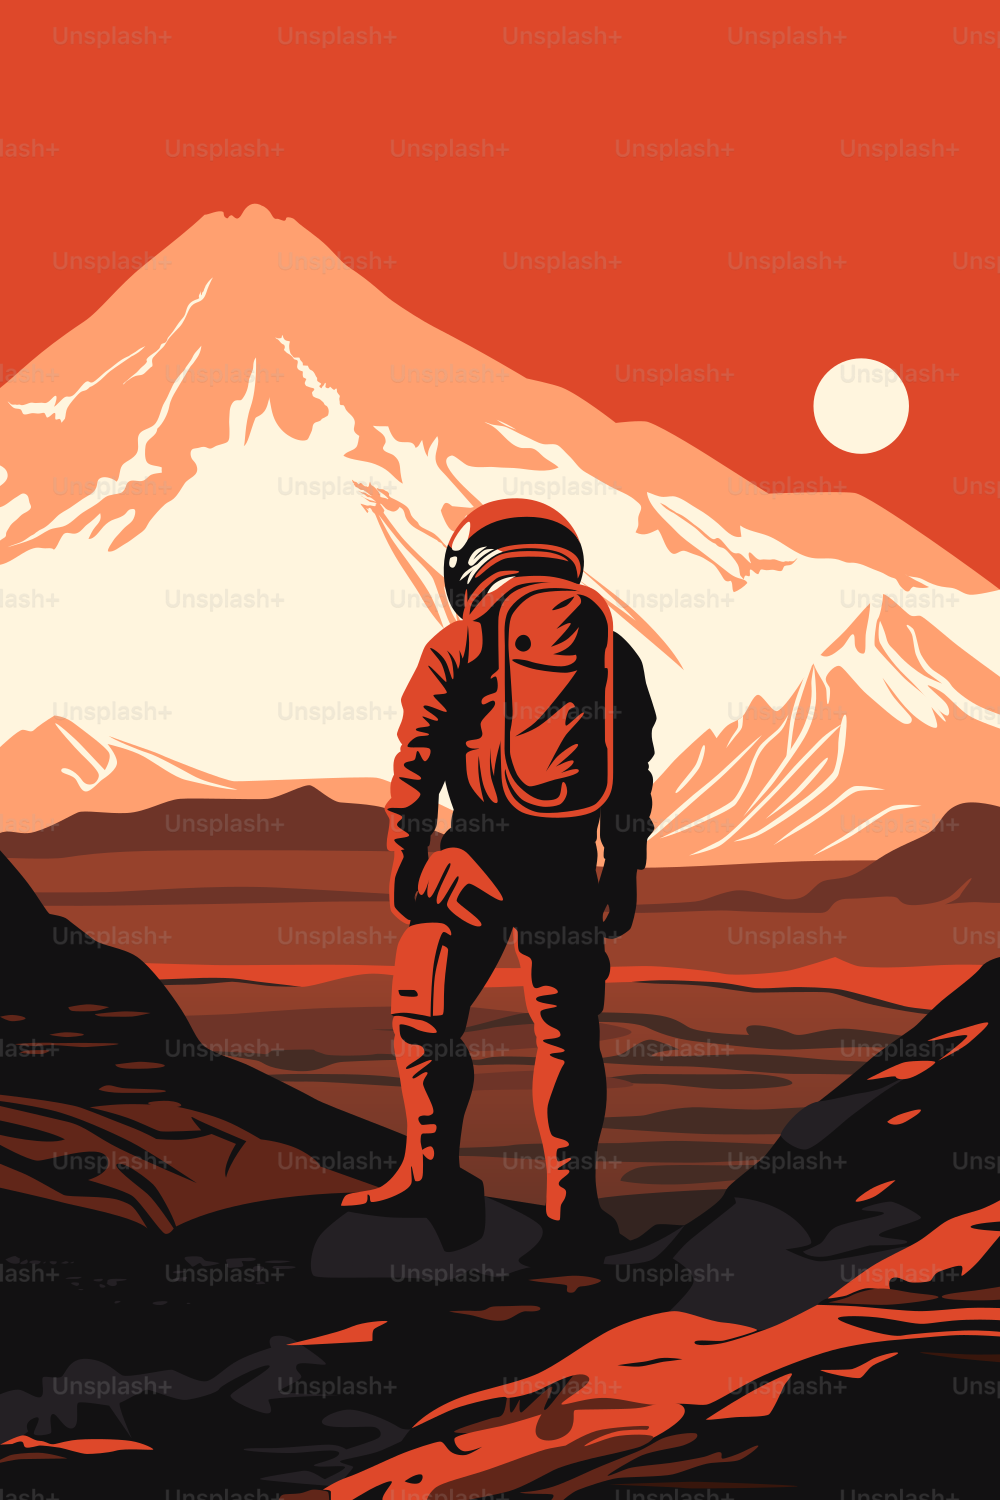 Mars Colonization Poster. Human Solar System Exploration. Astronaut on the Surface of the Red Planet, Looking at Its Landscape. Distant Sun in the Skies.